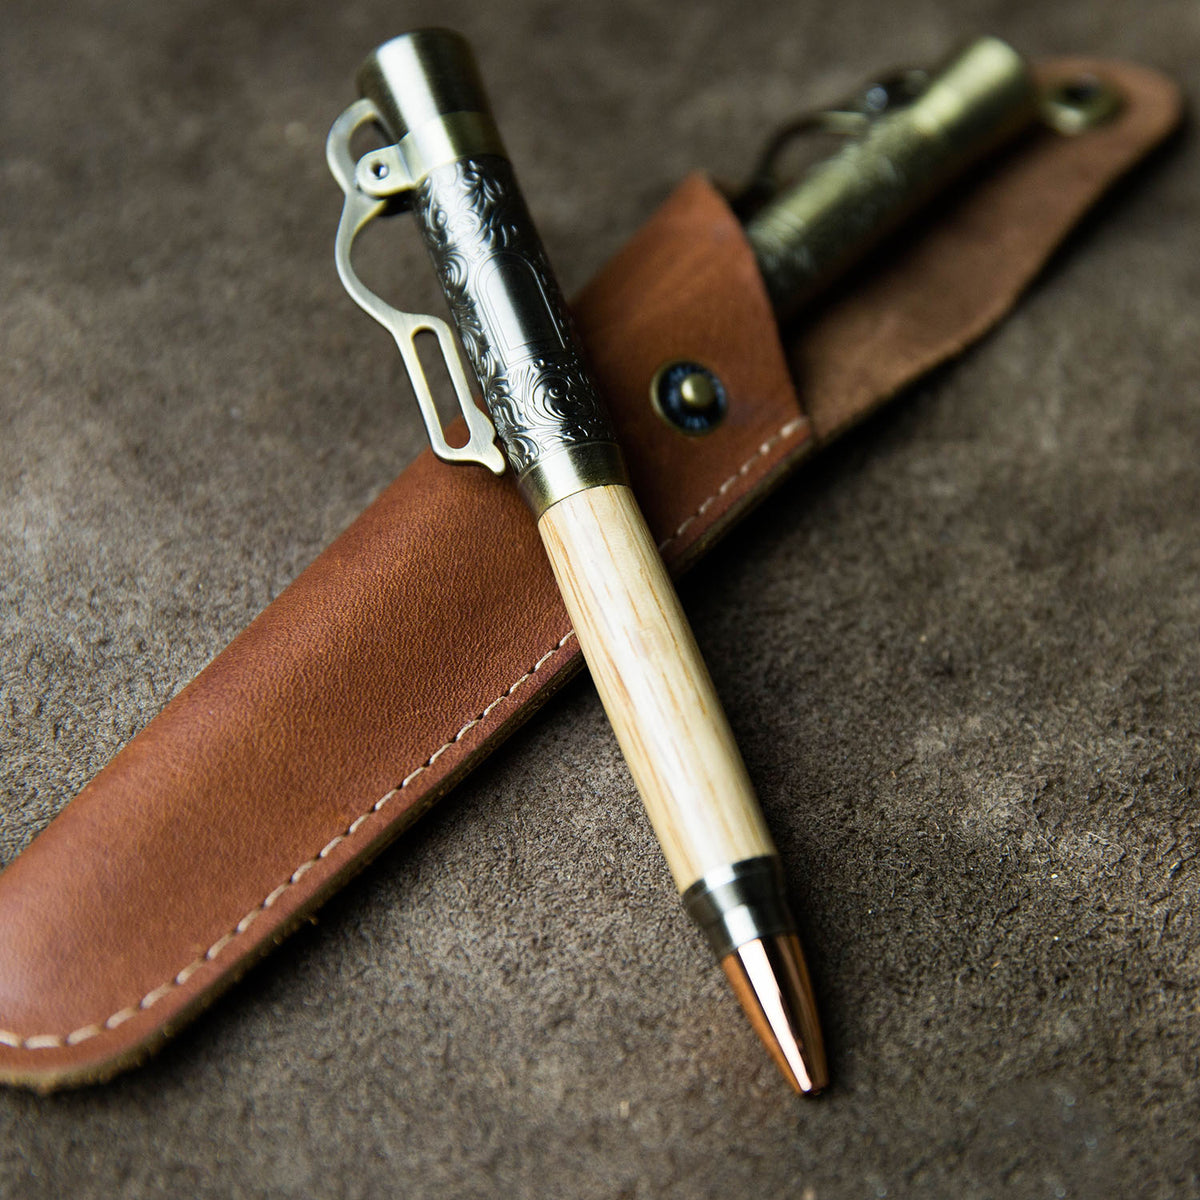 The Cowboy Lever Action Hand Turned Whiskey Barrel Pen + Pen Sleeve